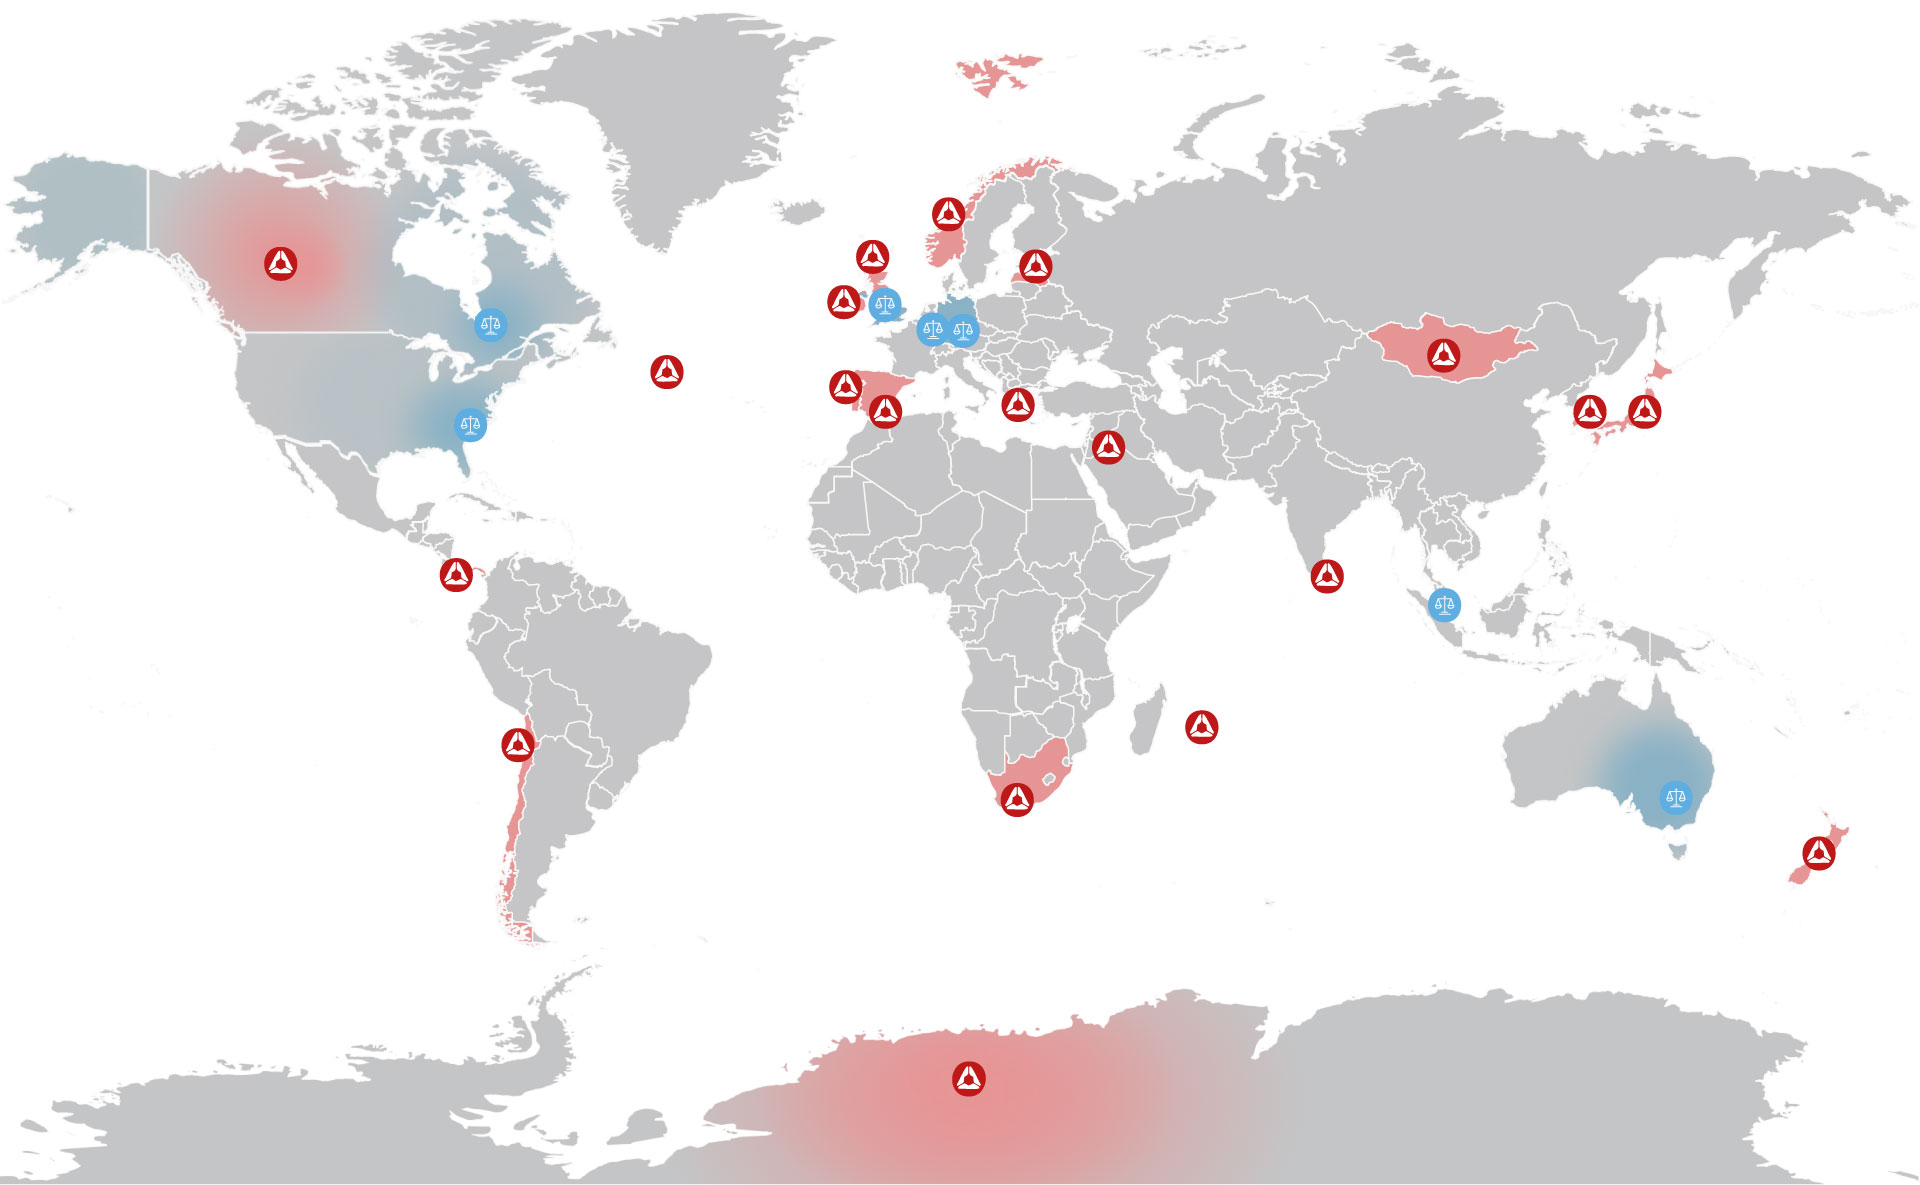 Global map showing Spire official licensed & legal entities and regulatory & licensing framework experience areas